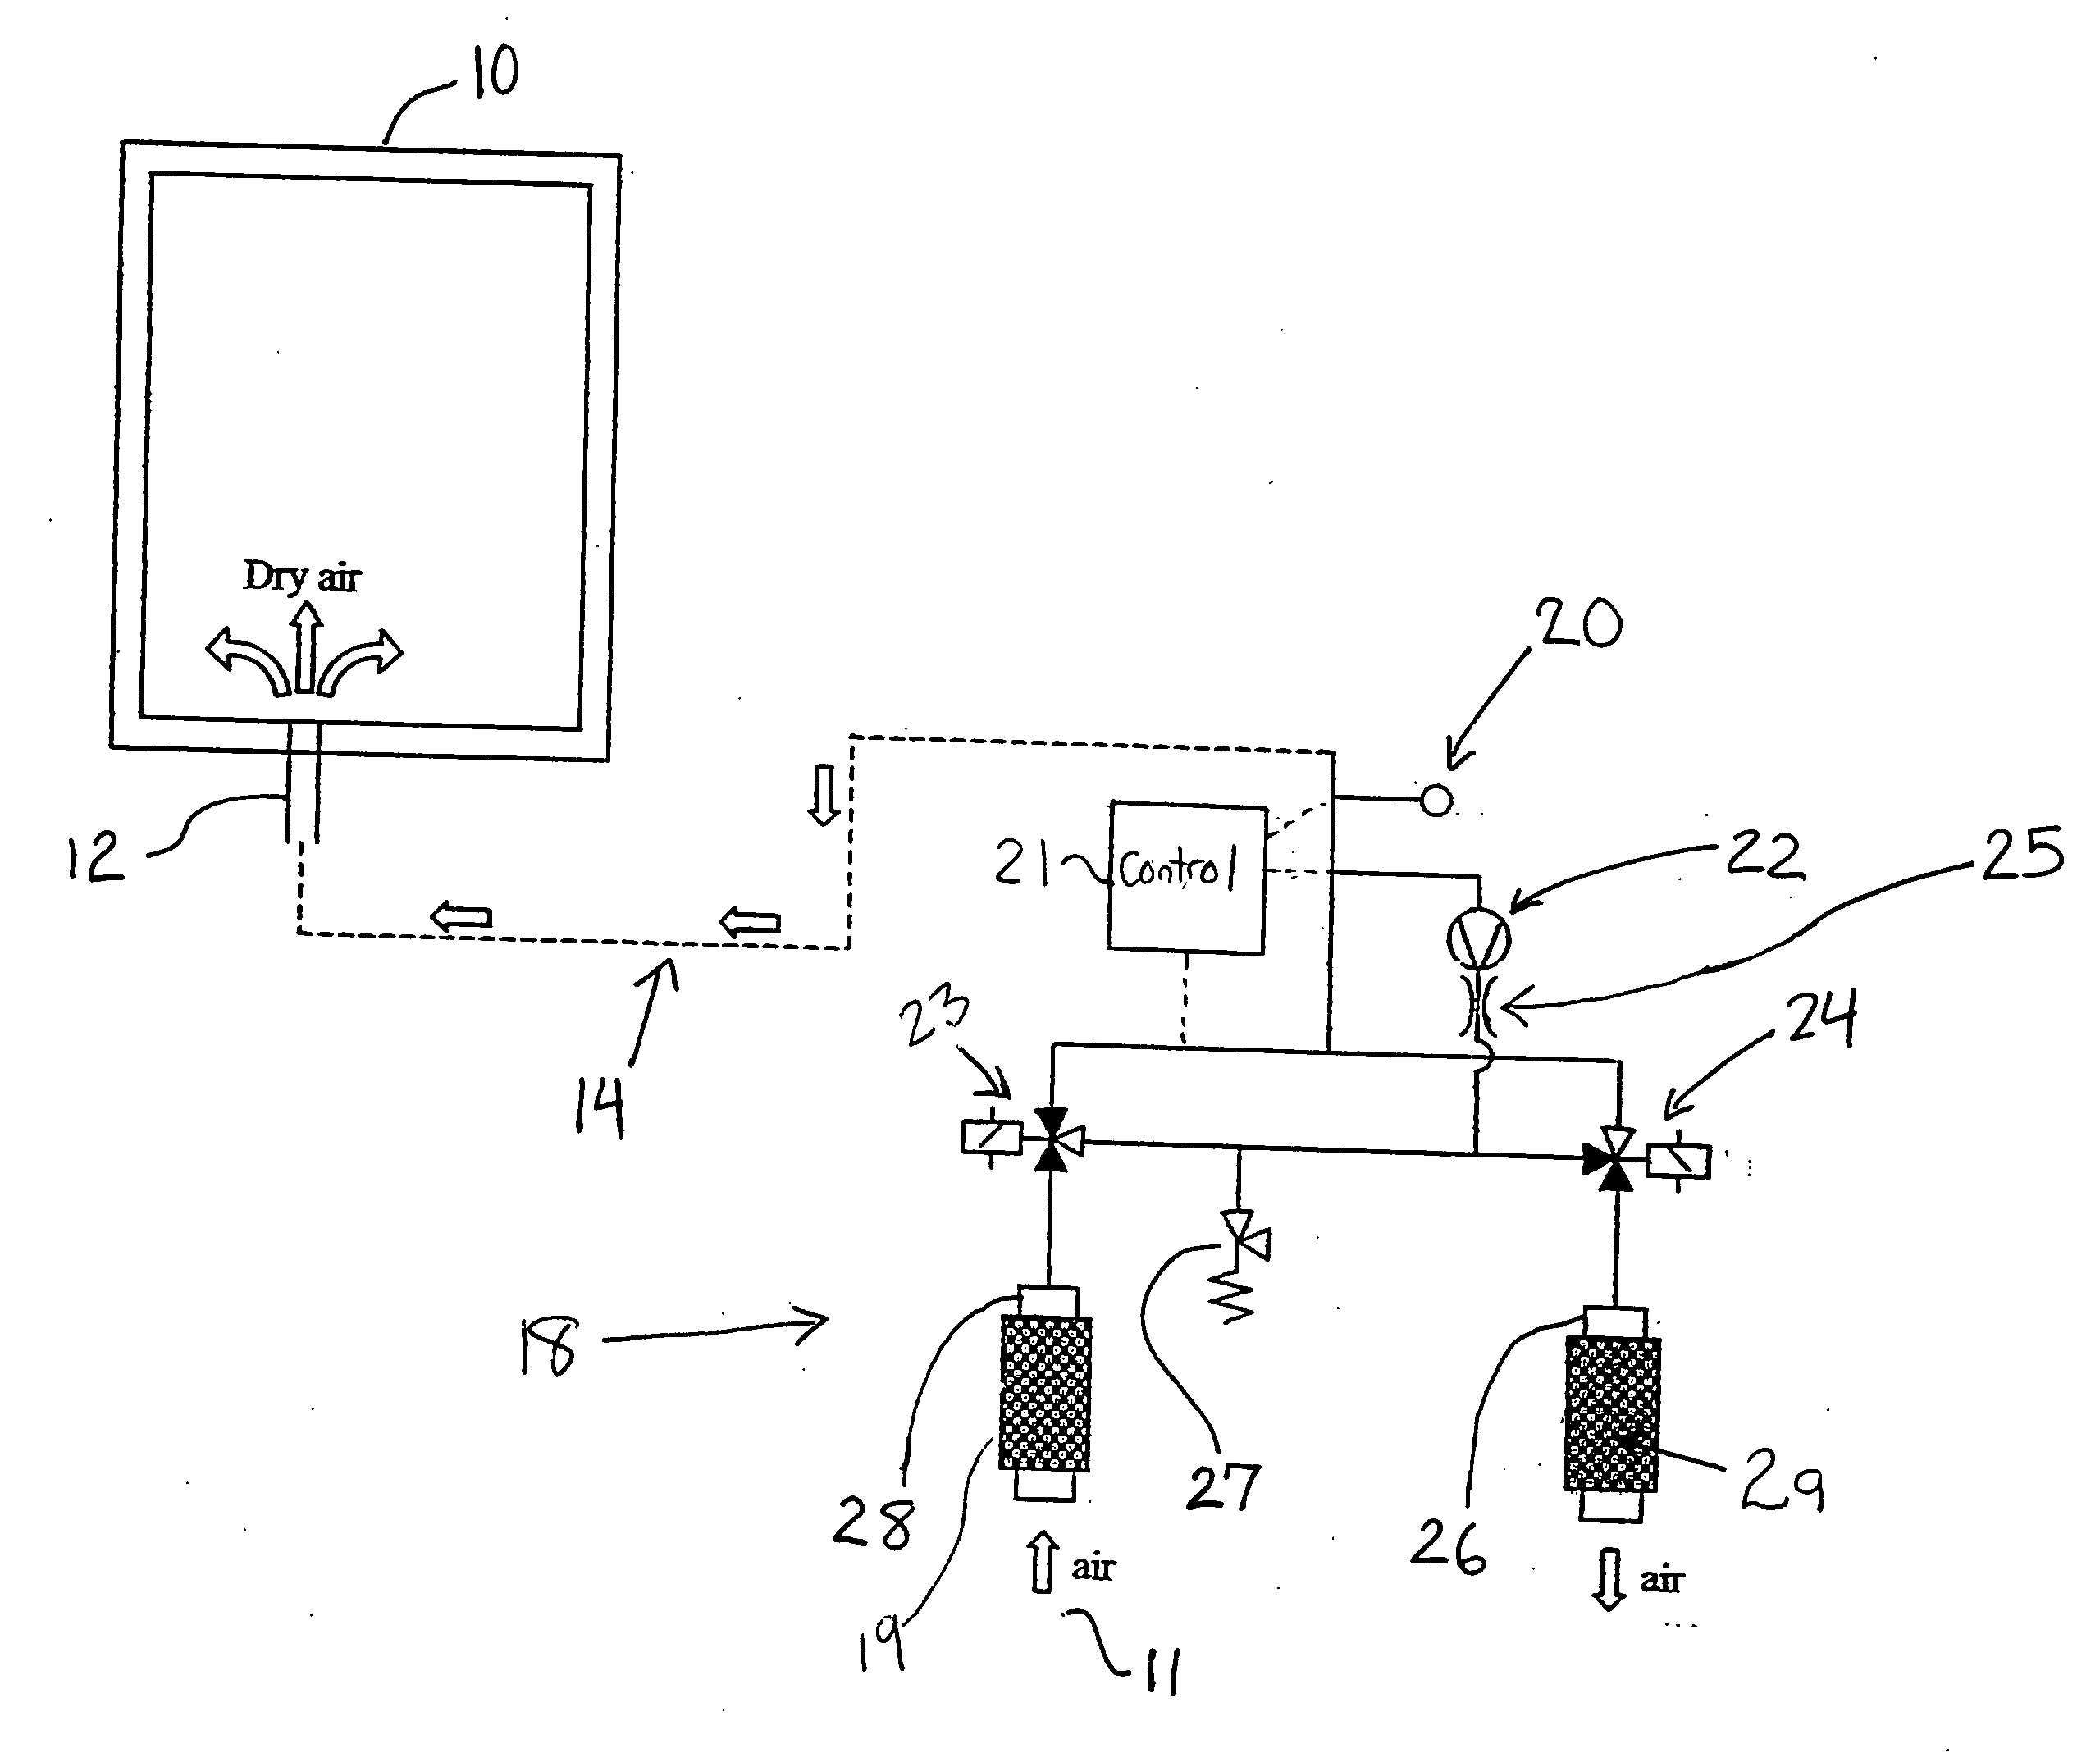 Dryer system for the prevention of frost in an ultra low temperature freezer